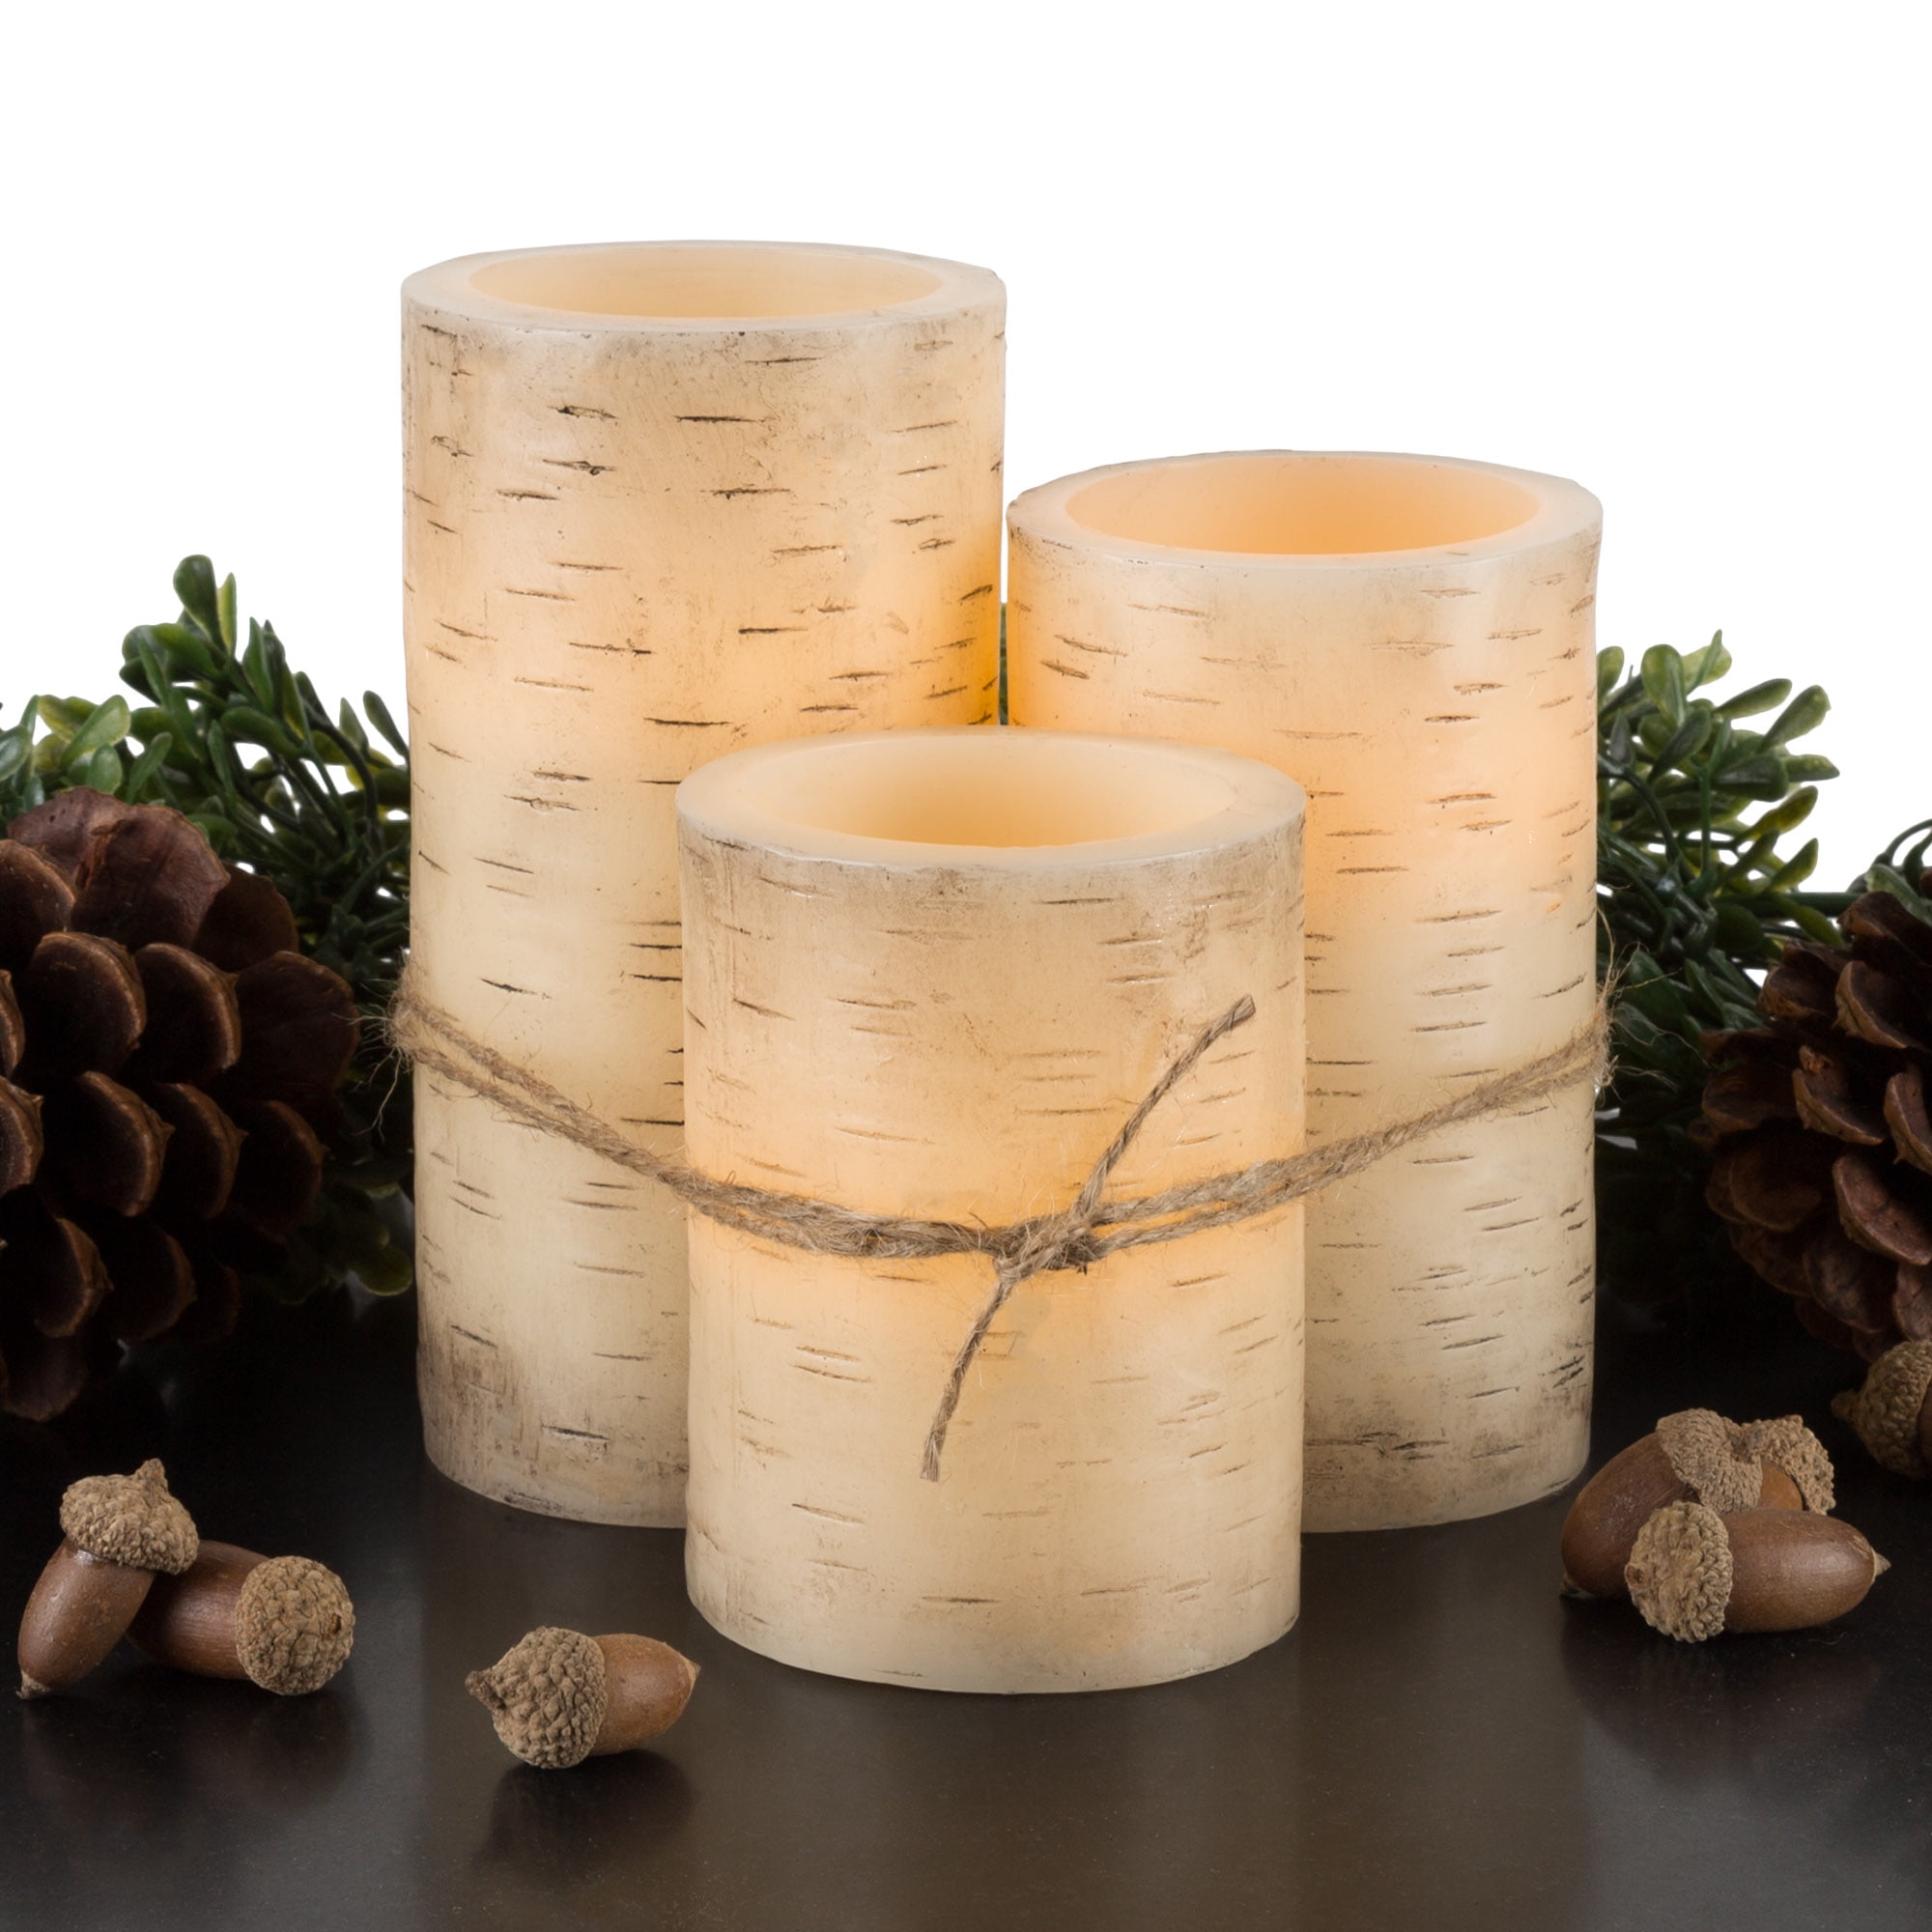 Batteries Included Flameless Christmas Candle with Timer Function Warm White Flickering Light Battery Operated Pillar Candles with Birch Effect Finish Set of 3 